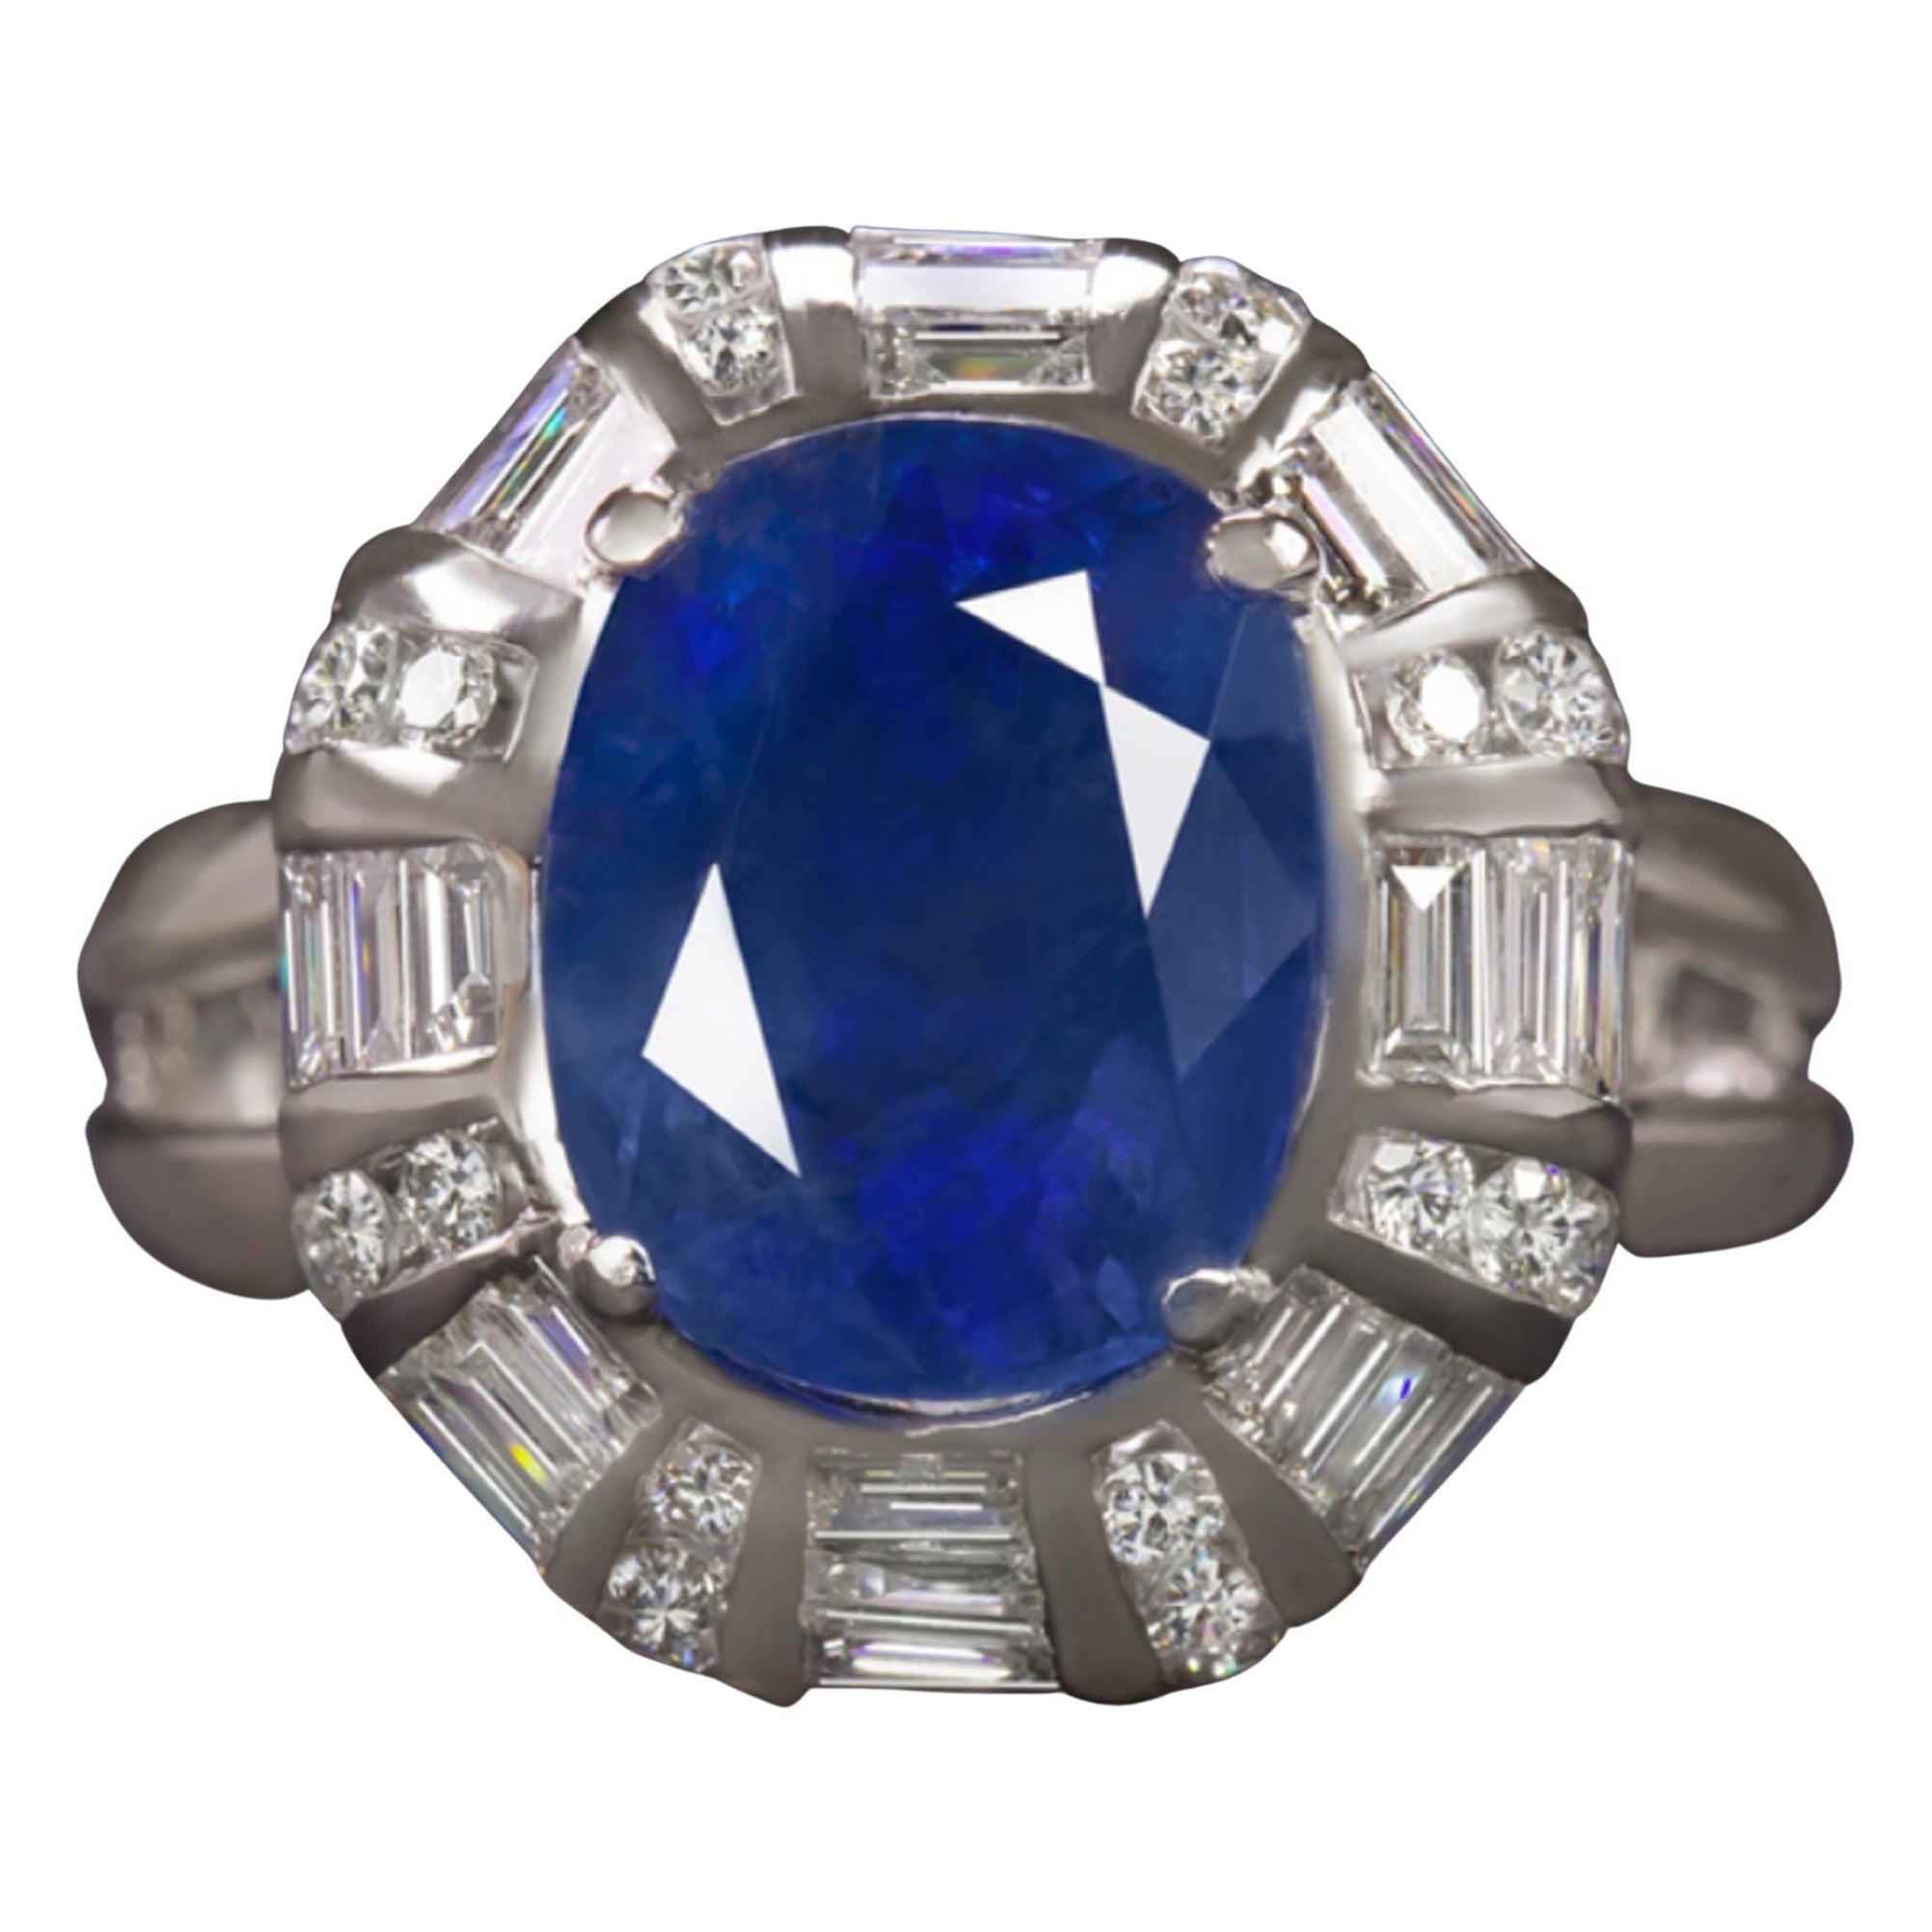 eye-catching and high quality 10.50cttw sapphire and diamond ring truly brings the glamour and the sparkle! The impressively large 6.00ct AGL certified unheated oval sapphire center is surrounded by a shimmering halo of high quality round and